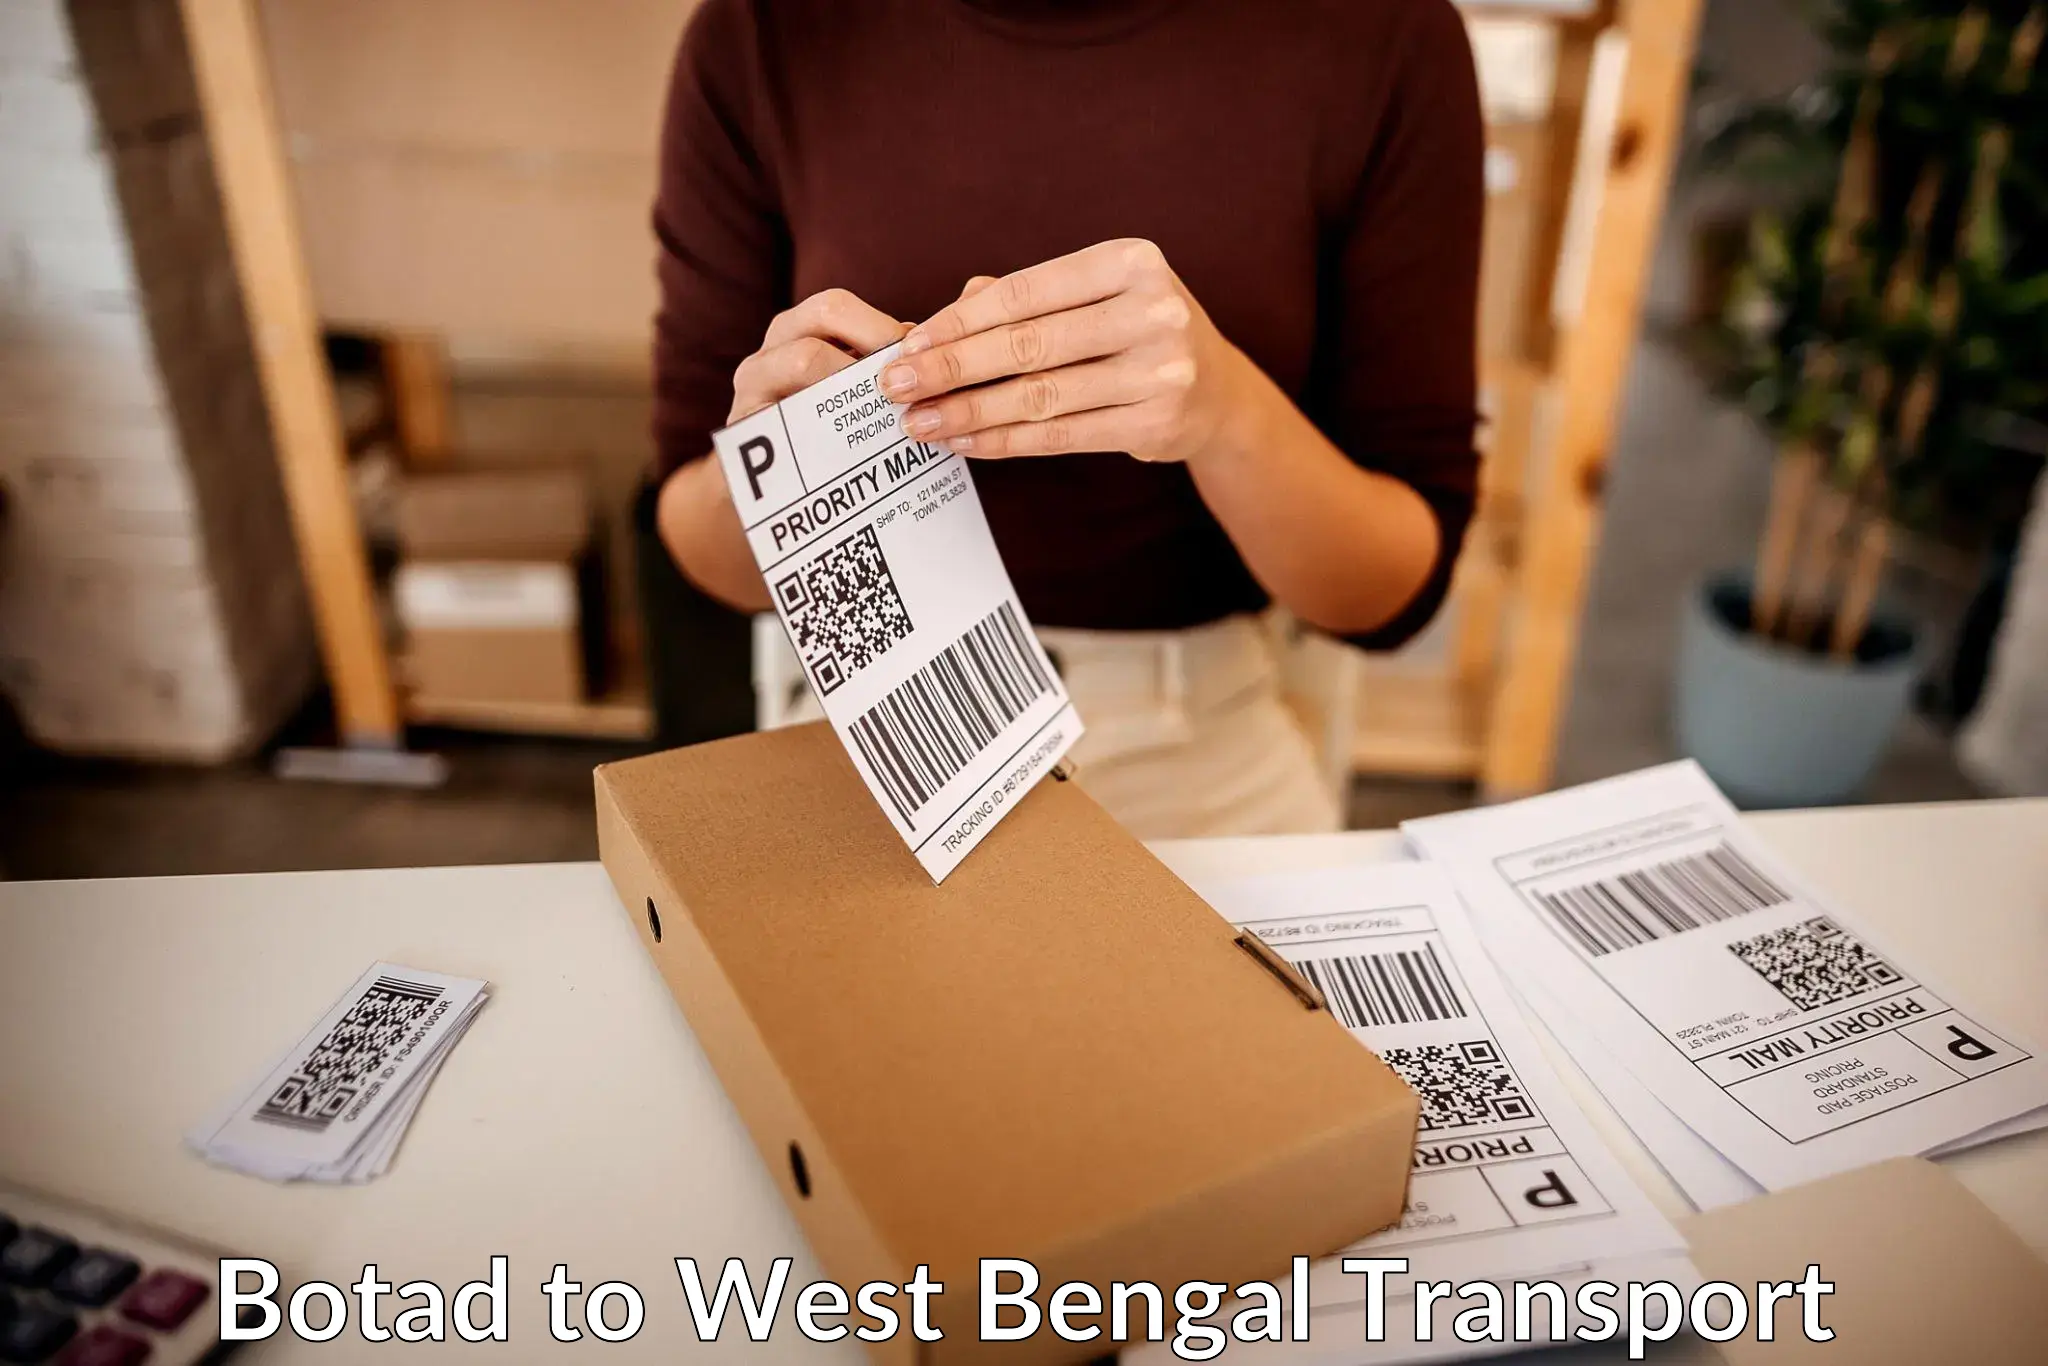 Nationwide transport services Botad to West Bengal